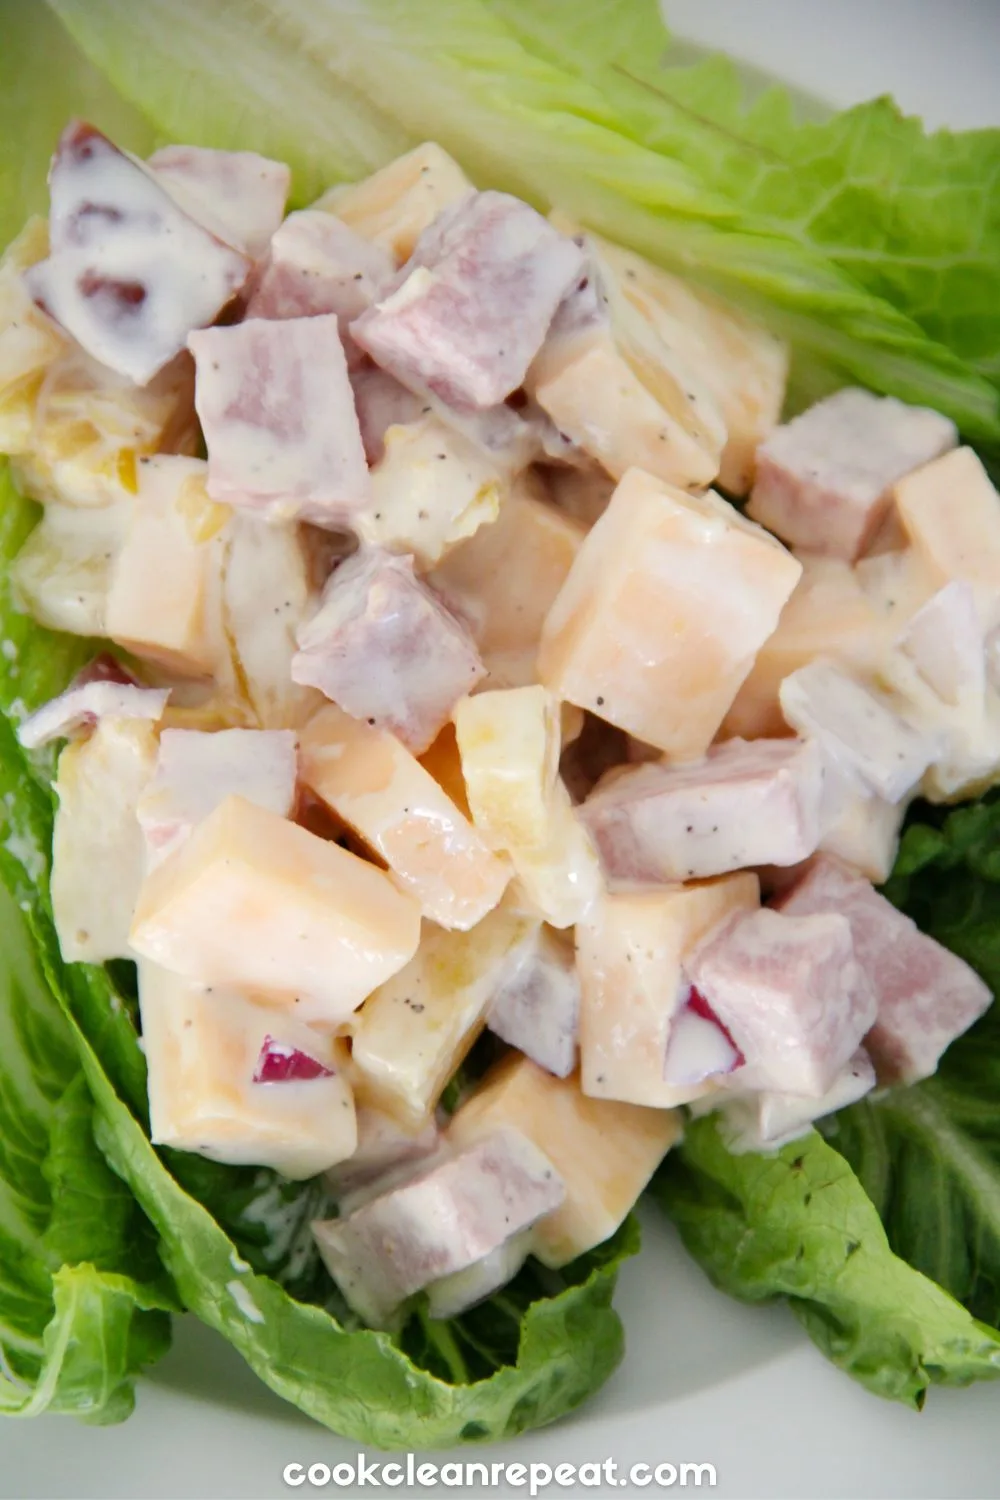 a close up of a pineapple ham salad on a leaf of lettuce